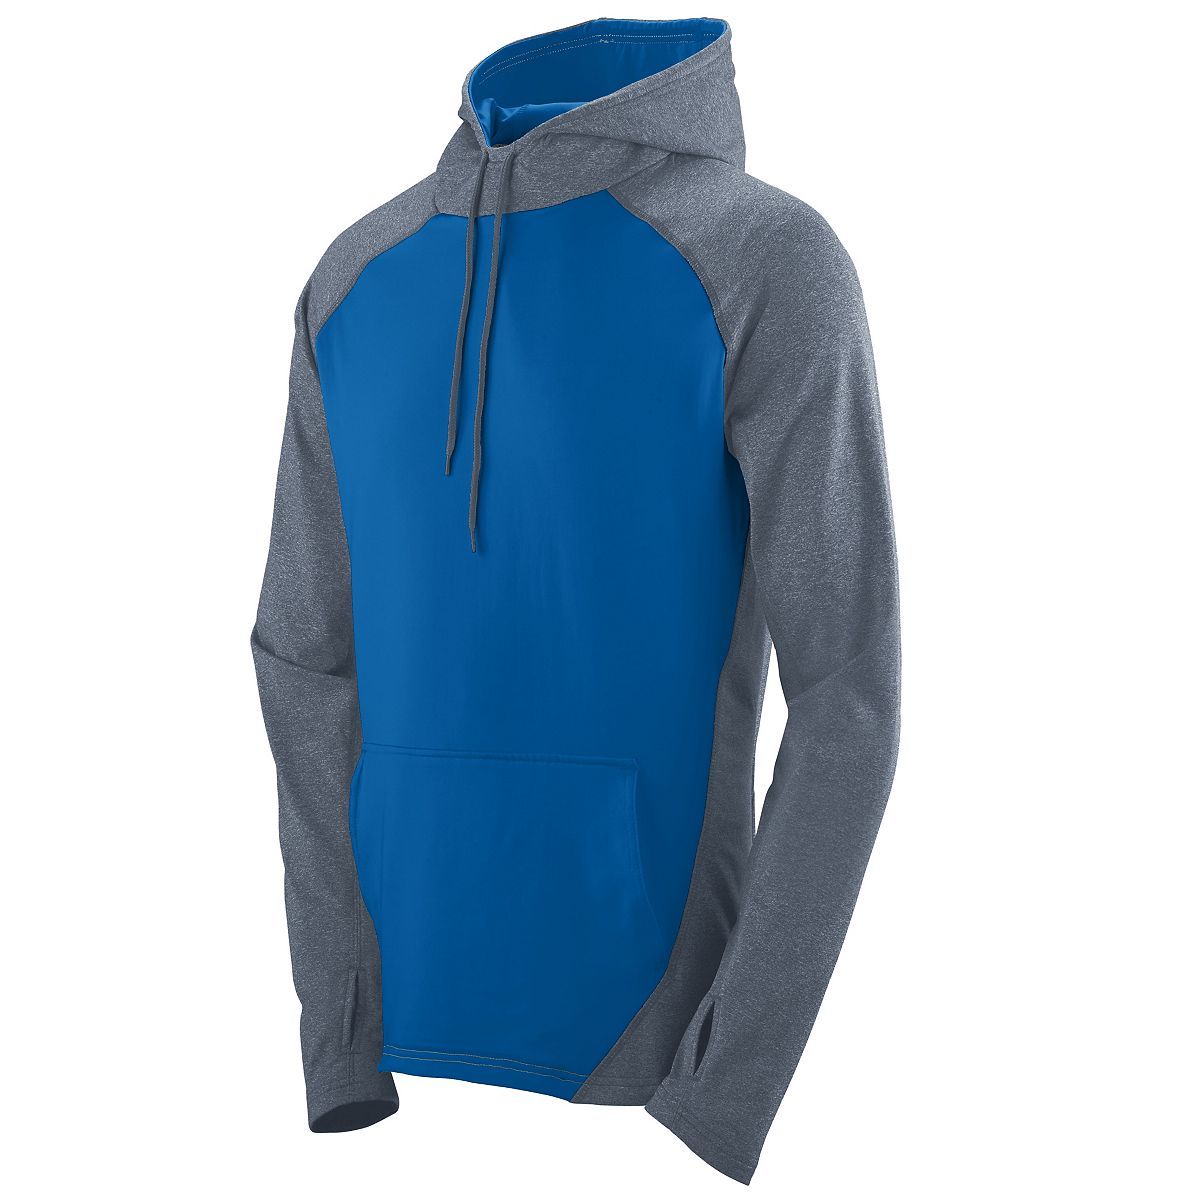 Augusta Sportswear Zeal Hoodie in Graphite Heather/Royal  -Part of the Adult, Adult-Hoodie, Hoodies, Augusta-Products product lines at KanaleyCreations.com